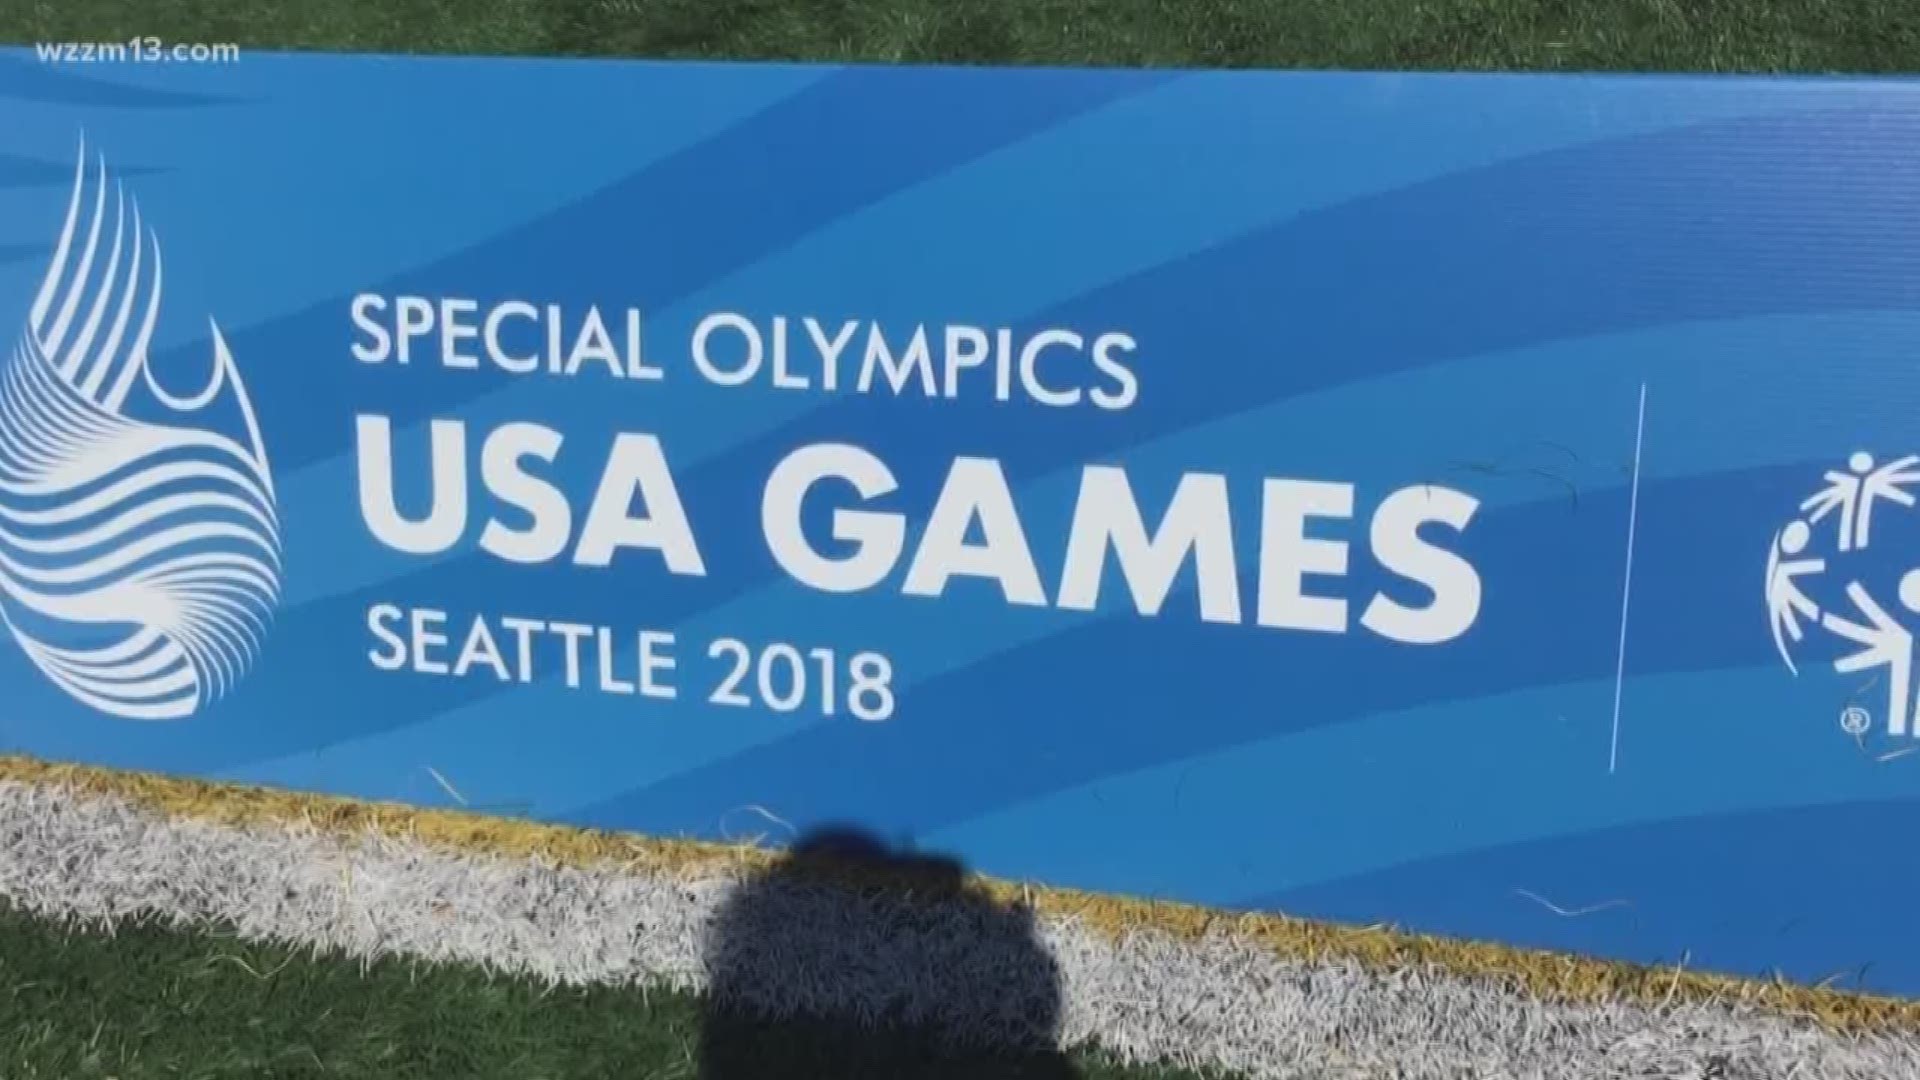 Special Olympics USA Games focus on inclusion